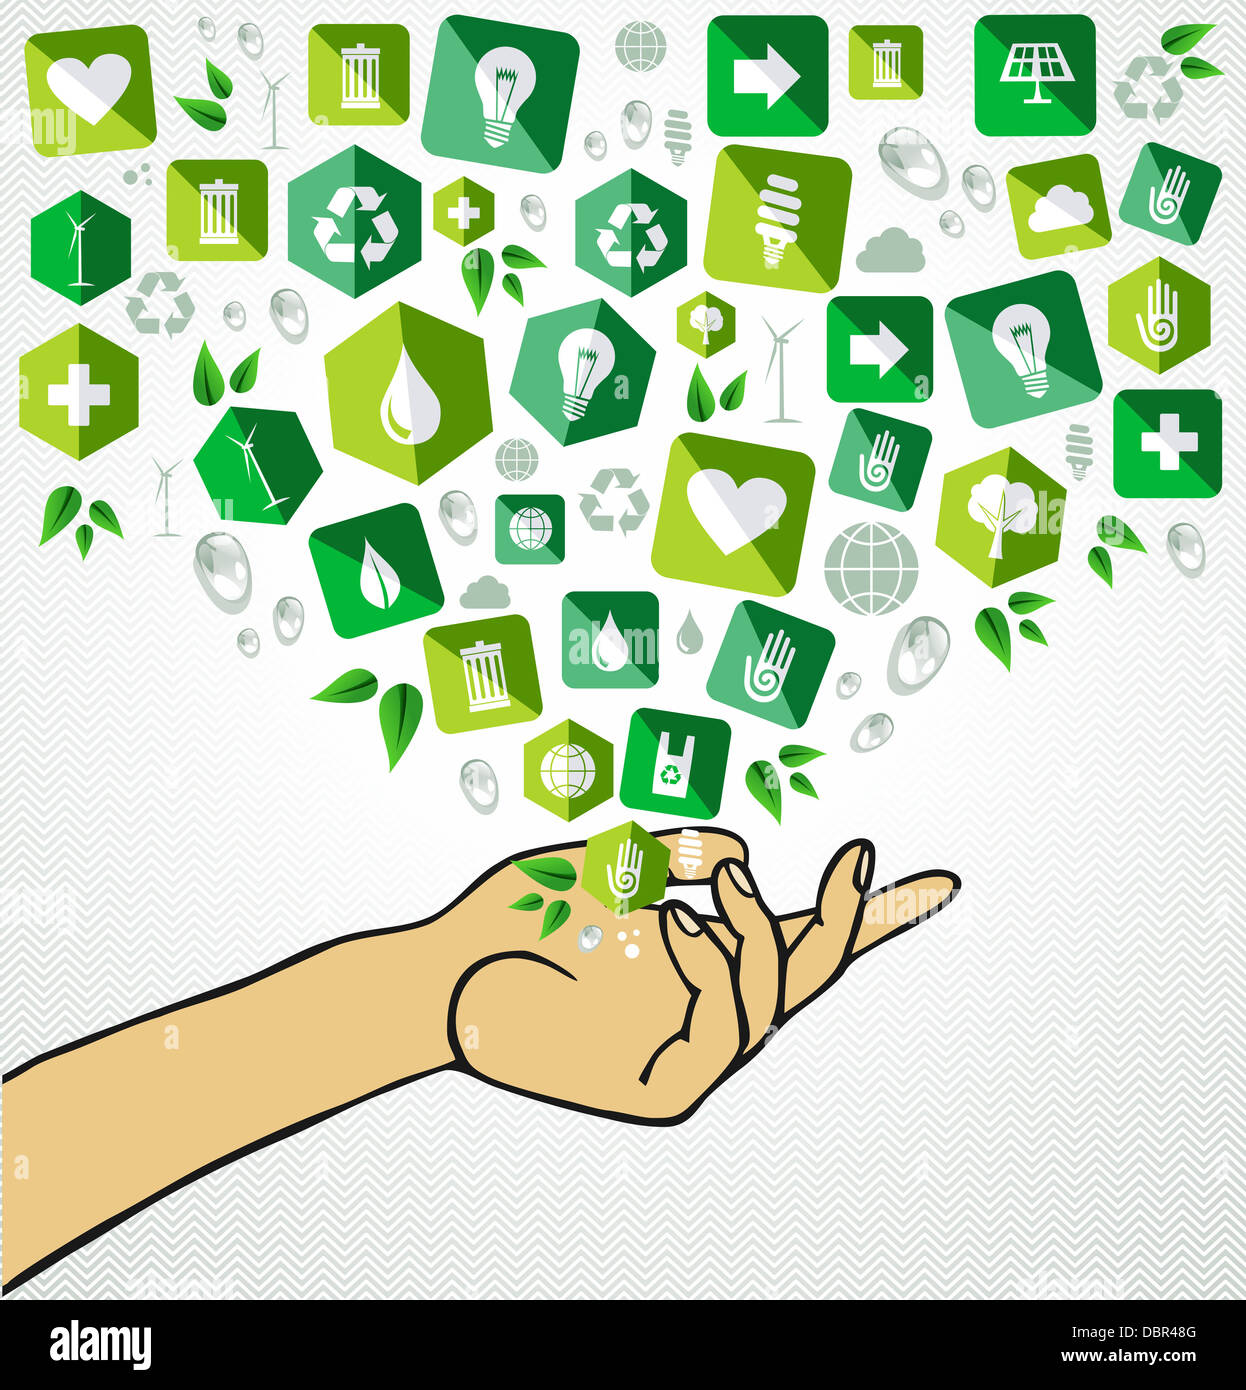 Human hand sustainable development flat icons splash illustration. This vector illustration is layered for easy manipulation and custom coloring Stock Photo